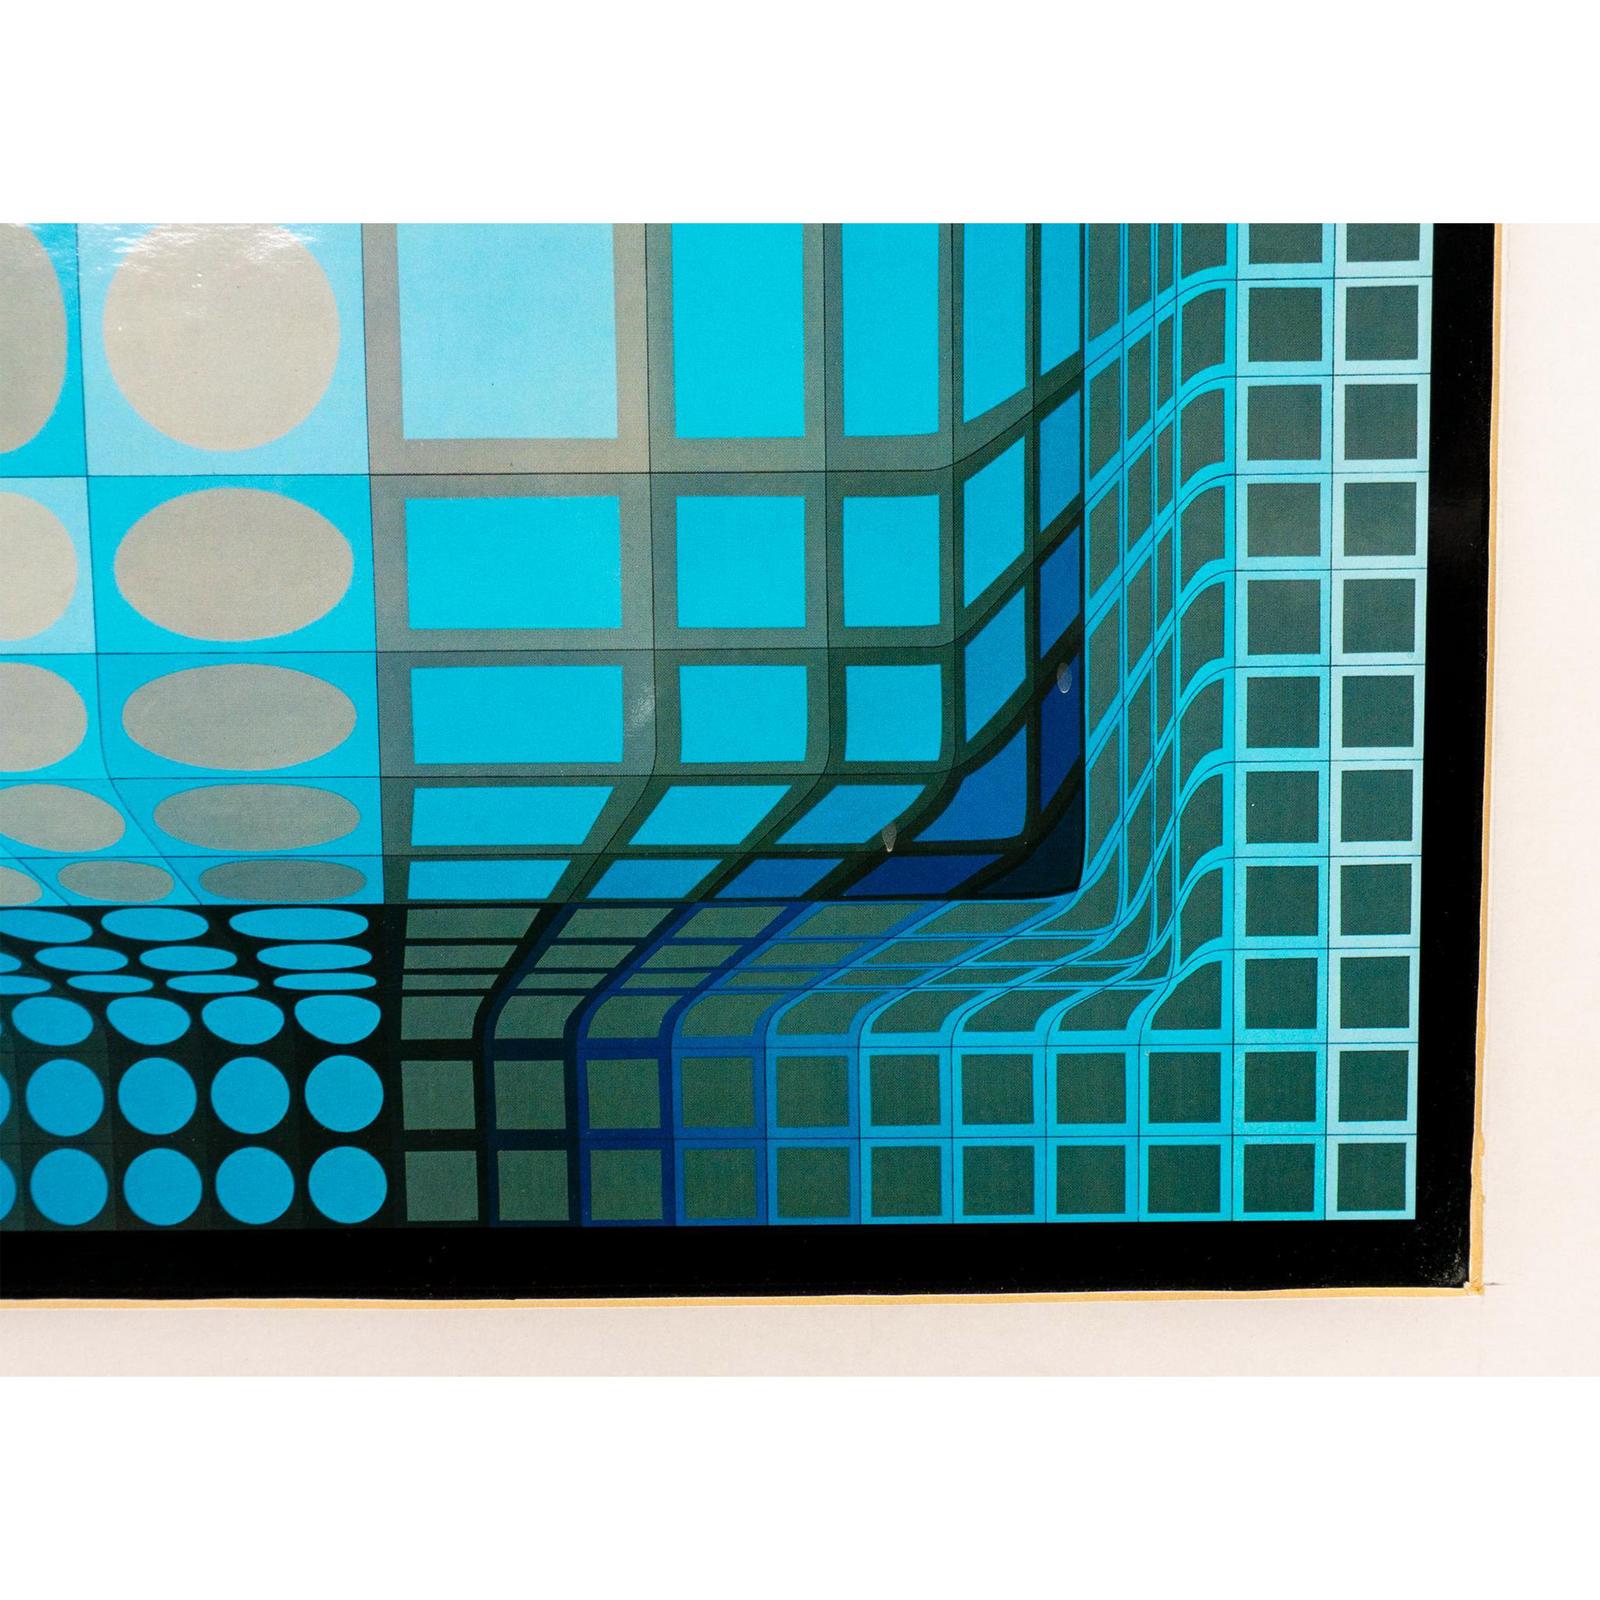 Victor Vasarely, the father of op art